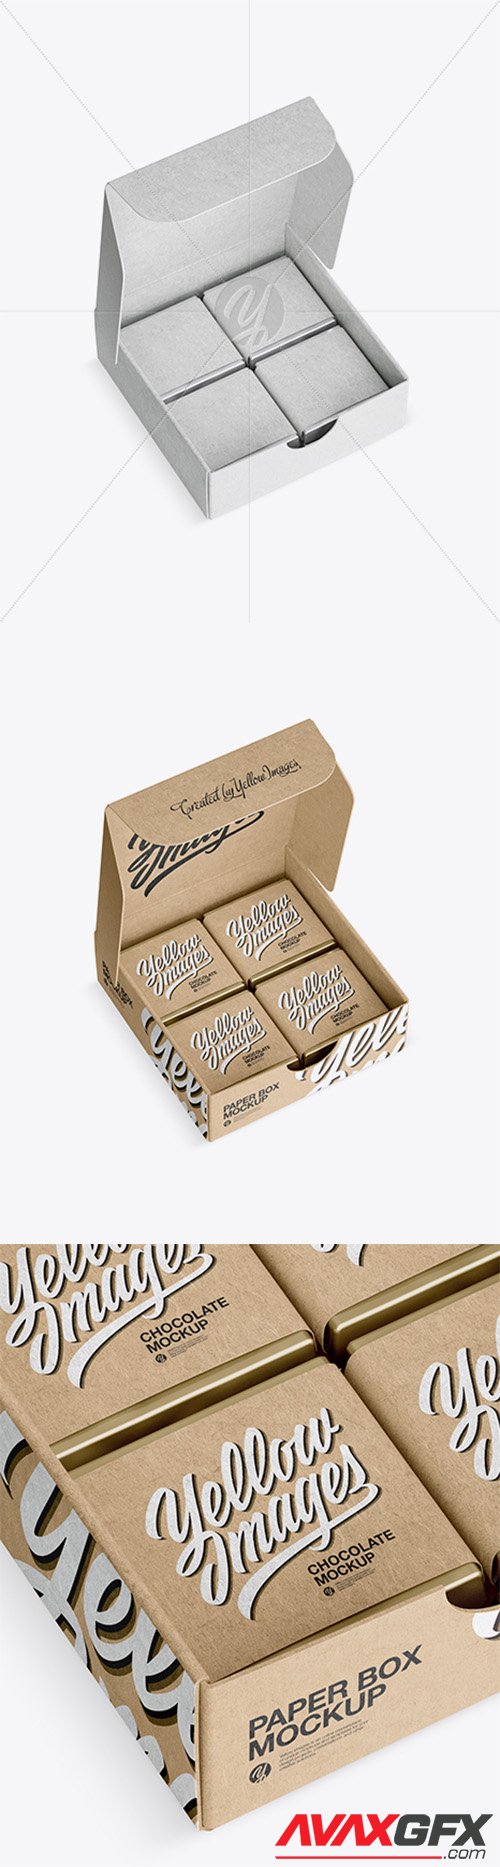 Download Opened Kraft Paper Box With Chocolates Mockup Half Side View High Angle Shot 23916 Avaxgfx All Downloads That You Need In One Place Graphic From Nitroflare Rapidgator